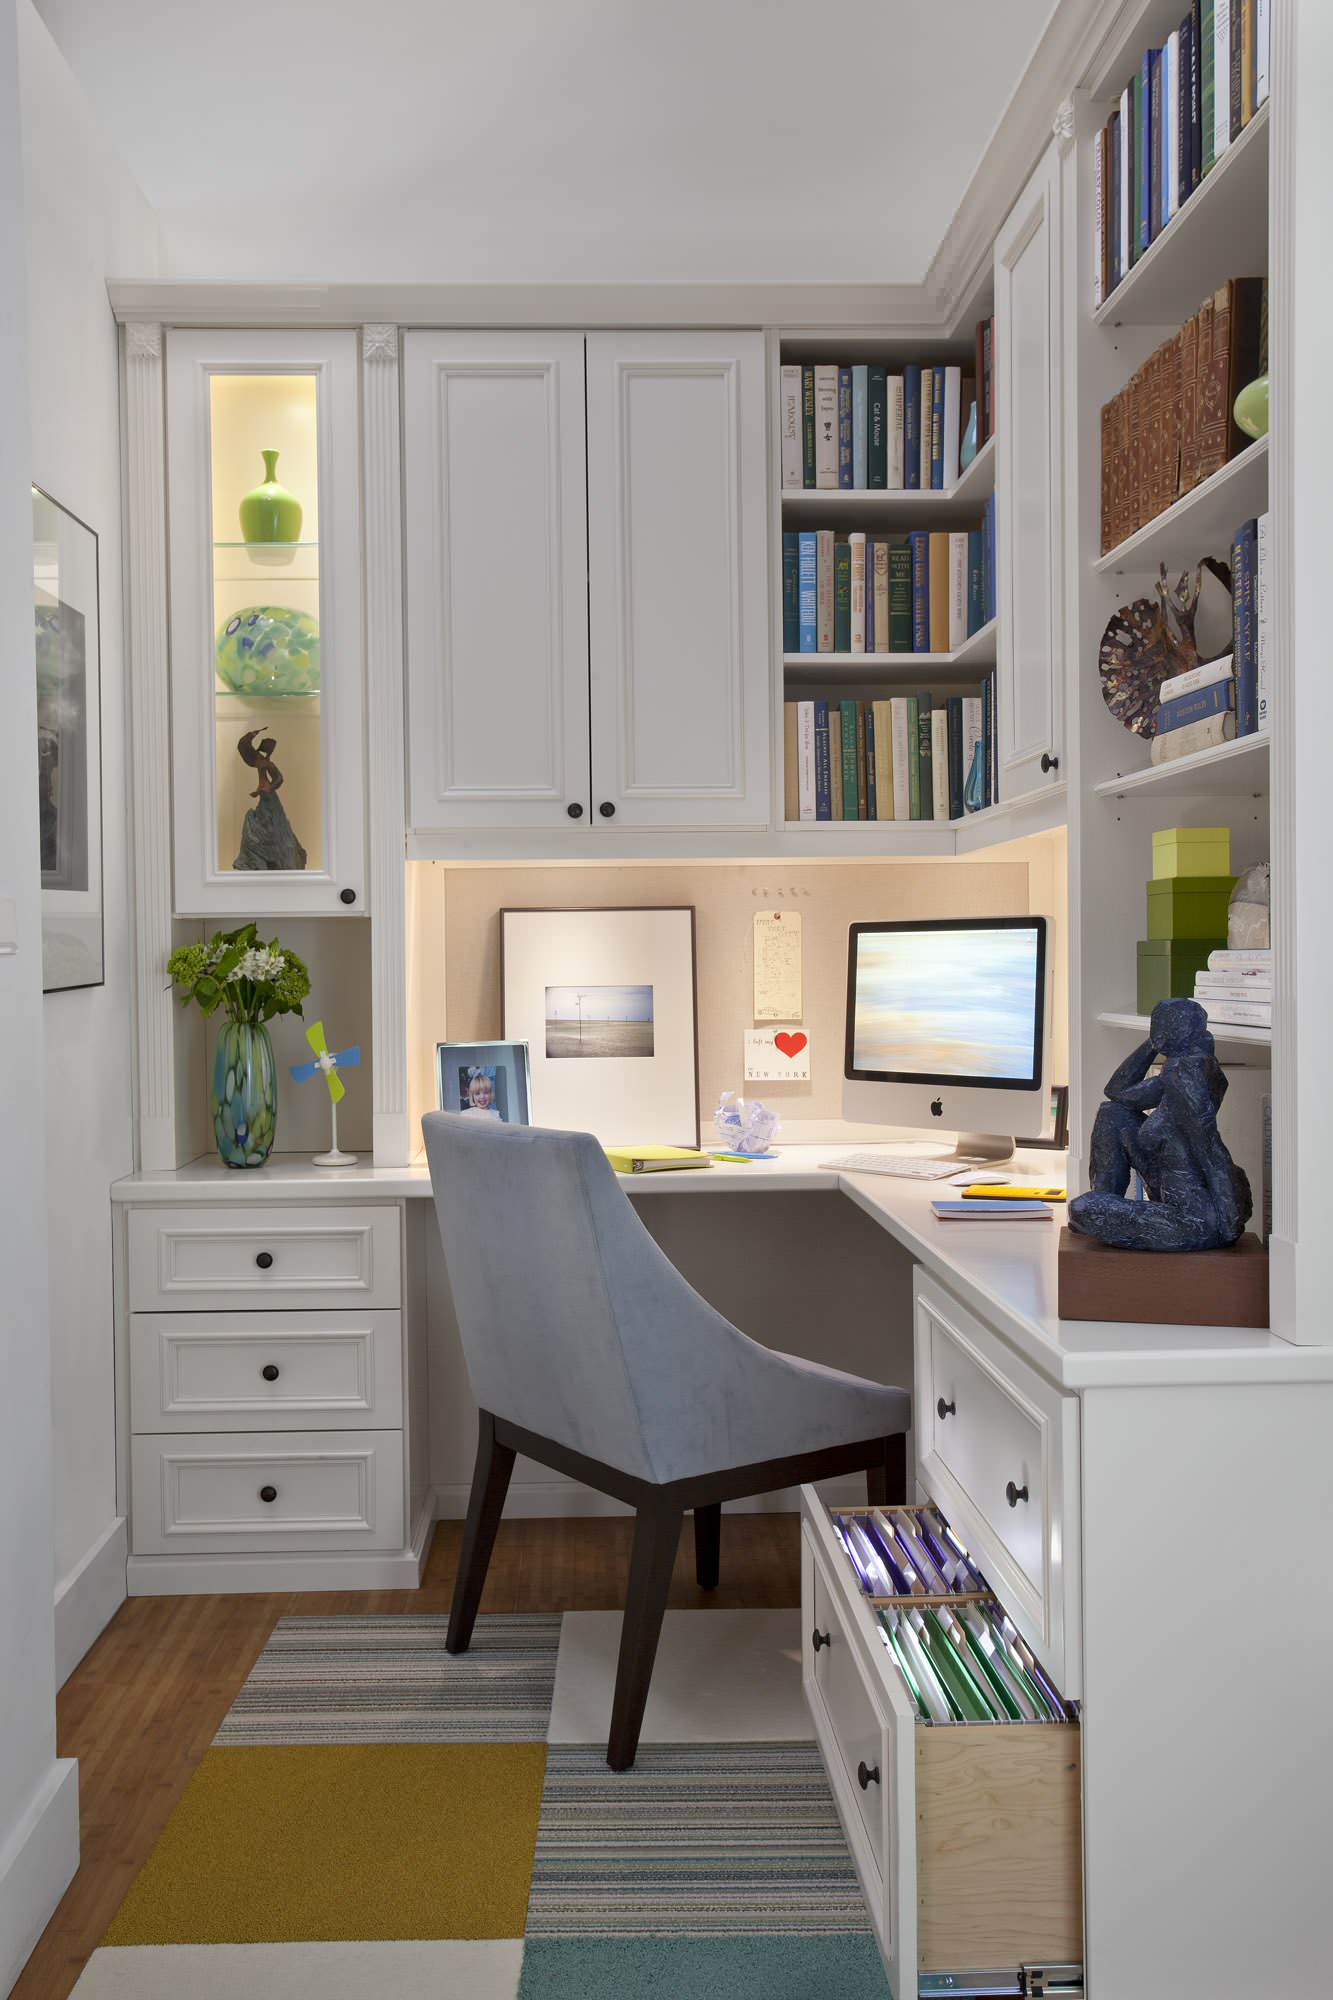 Home Office Design Ideas For Inspiration